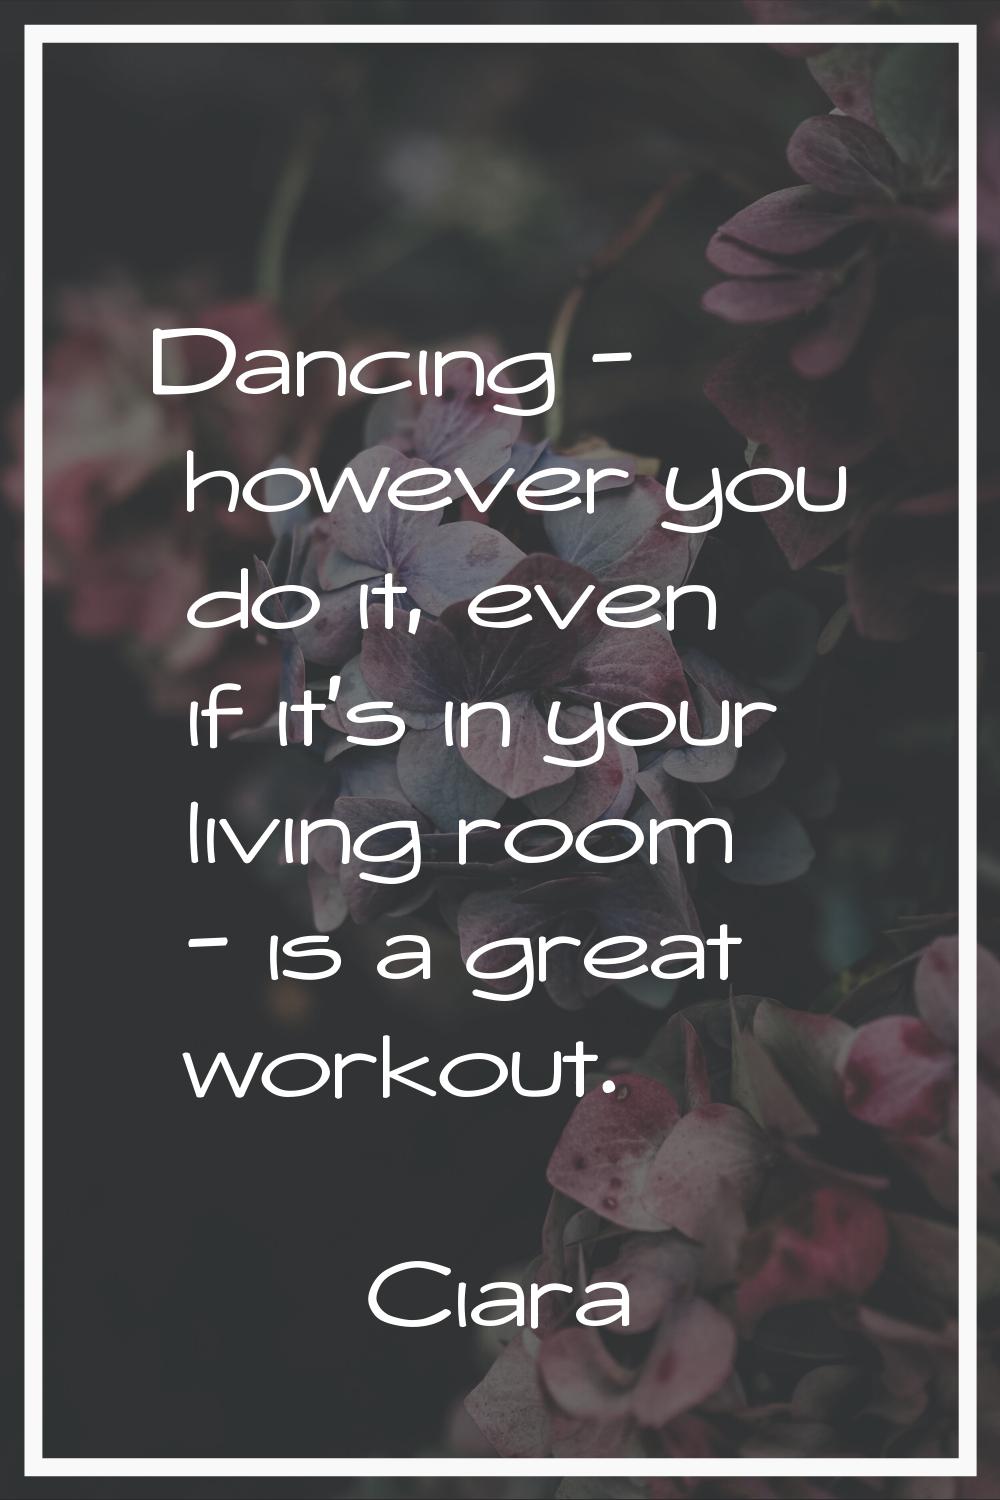 Dancing - however you do it, even if it's in your living room - is a great workout.